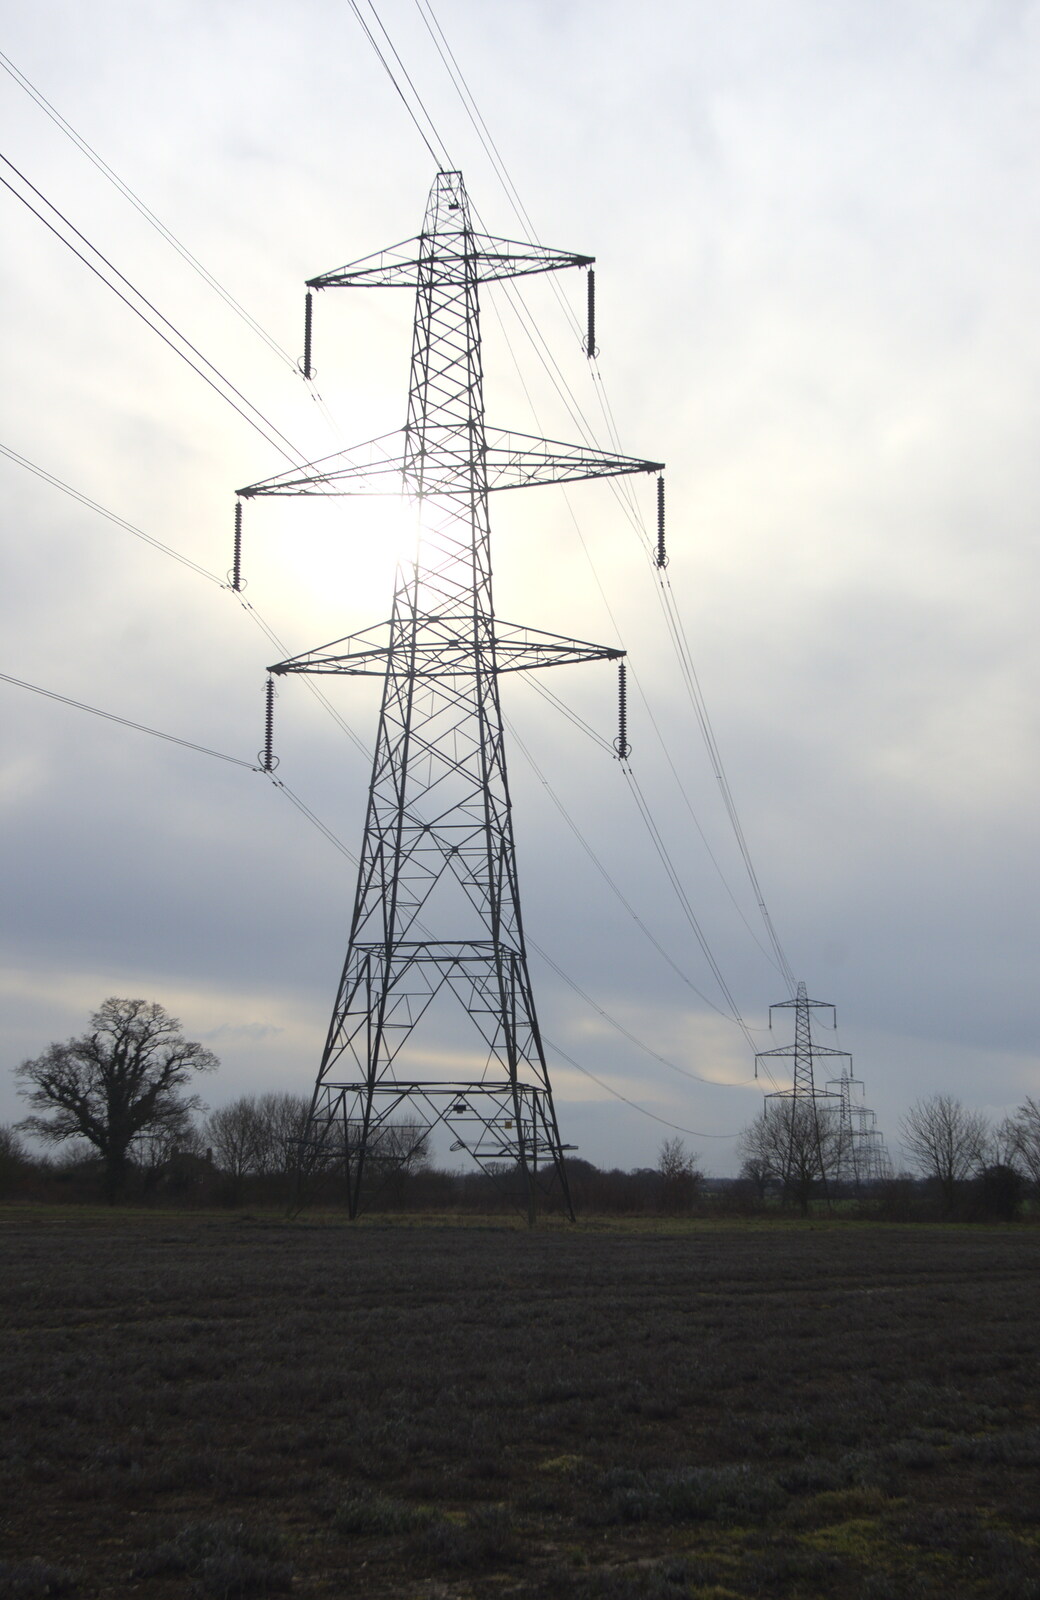 Pylons and a weak sun from A Winter's Walk, Thrandeston, Suffolk - 5th February 2017